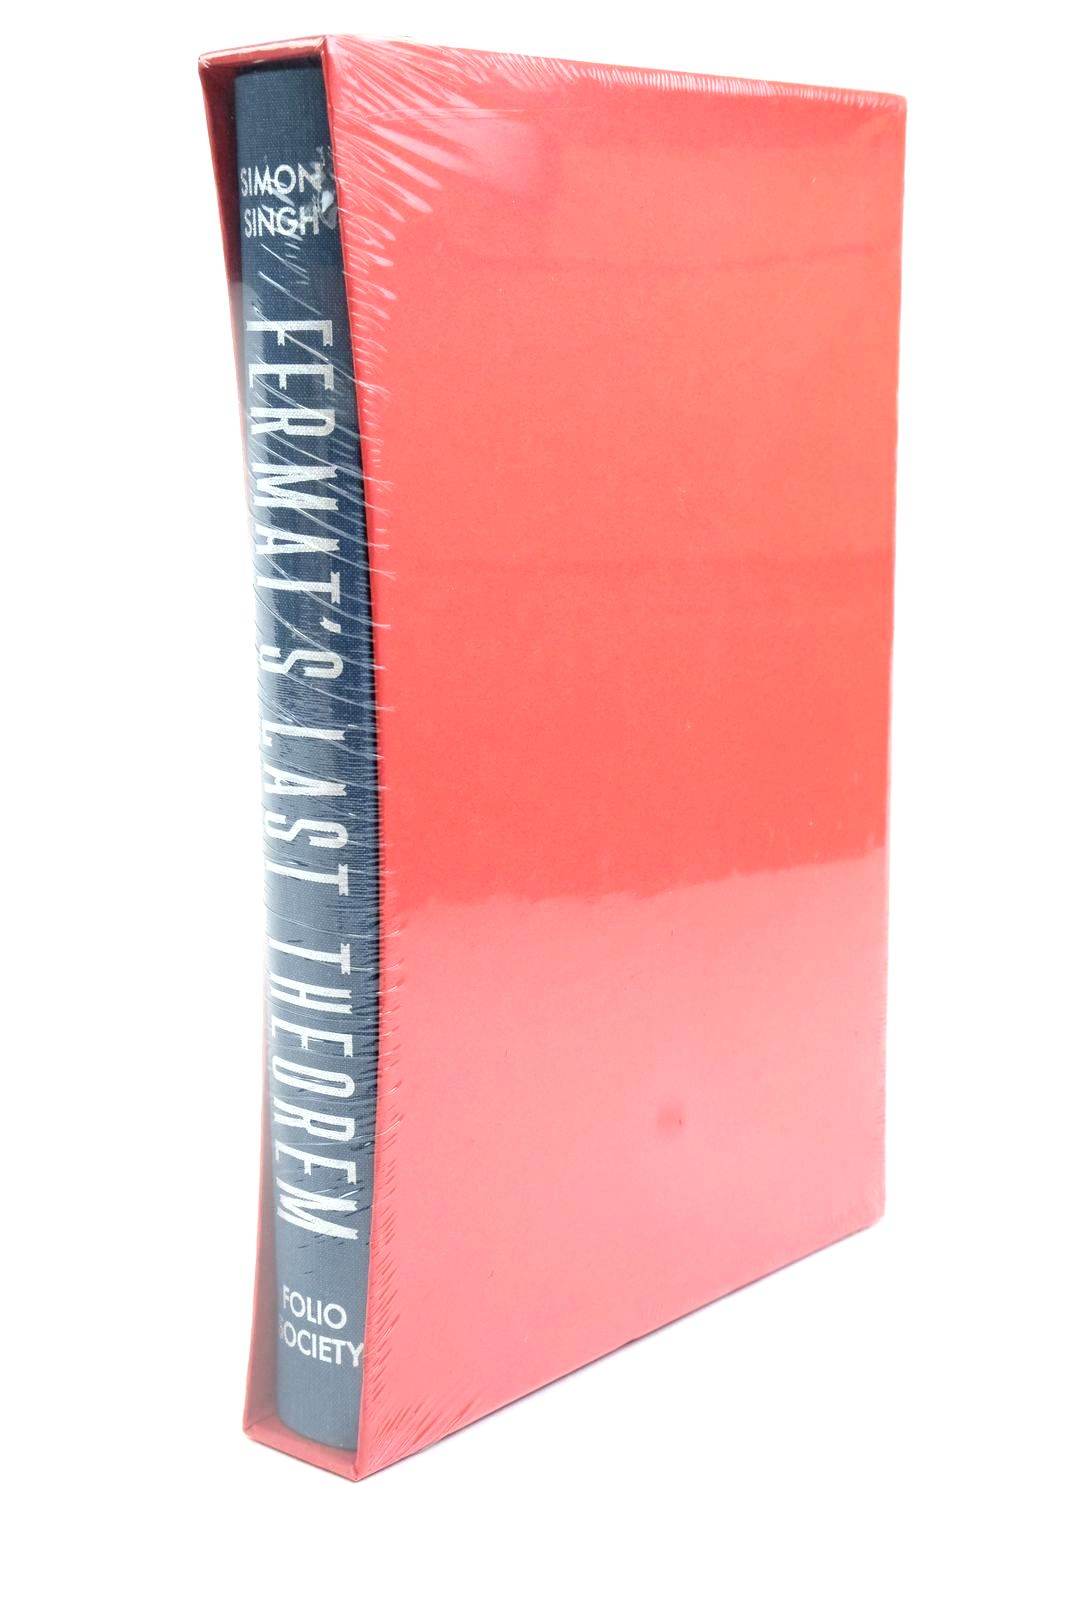 Photo of FERMAT'S LAST THEOREM written by Singh, Simon published by Folio Society (STOCK CODE: 1321990)  for sale by Stella & Rose's Books